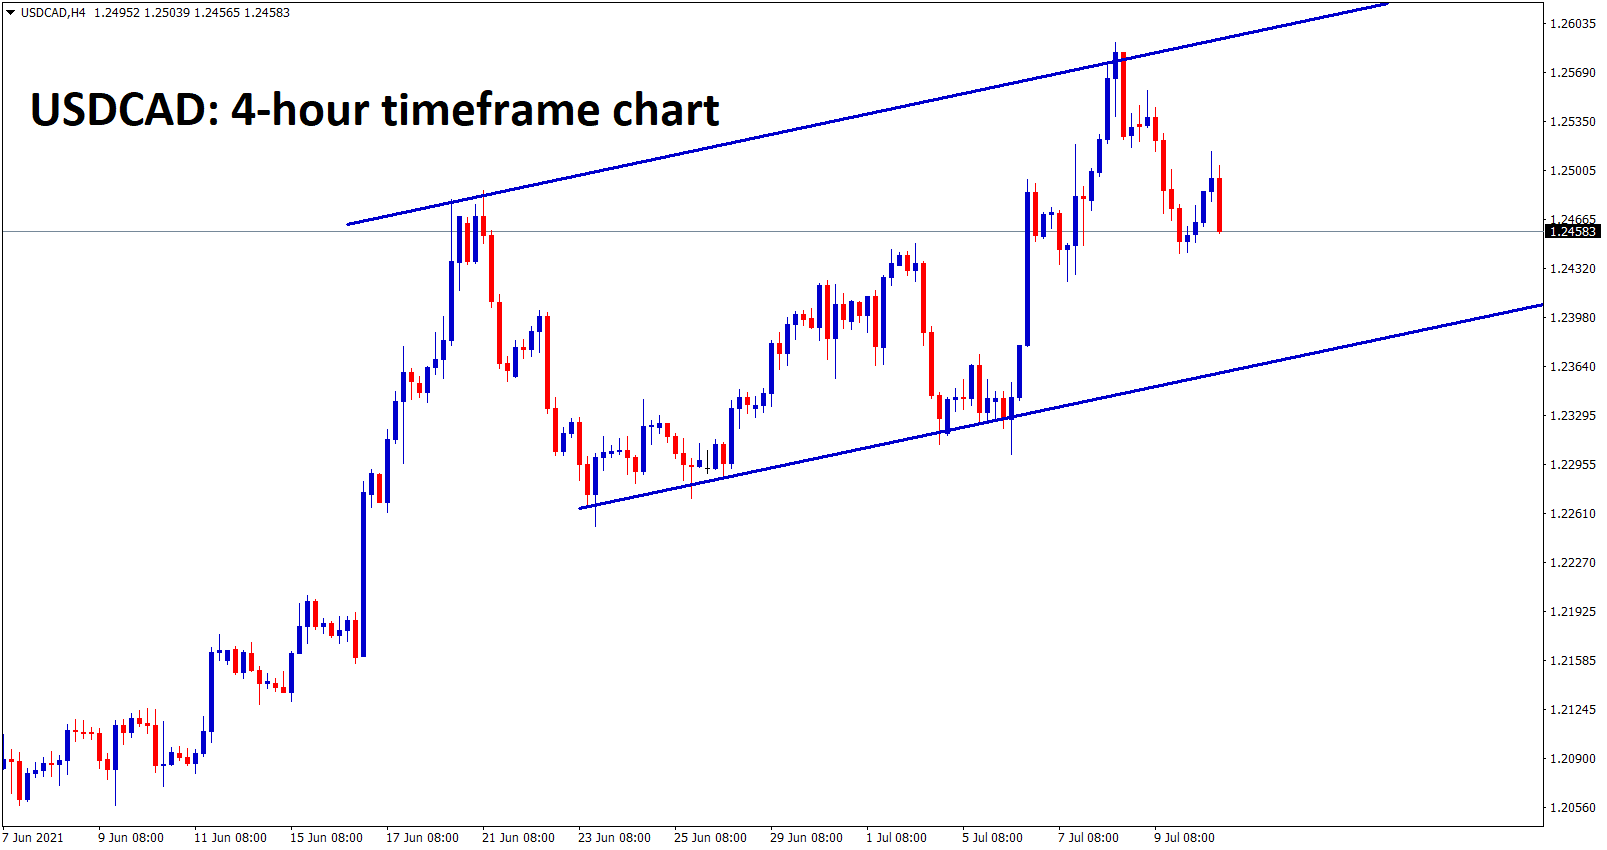 USDCAD is moving in an uptrend ranges